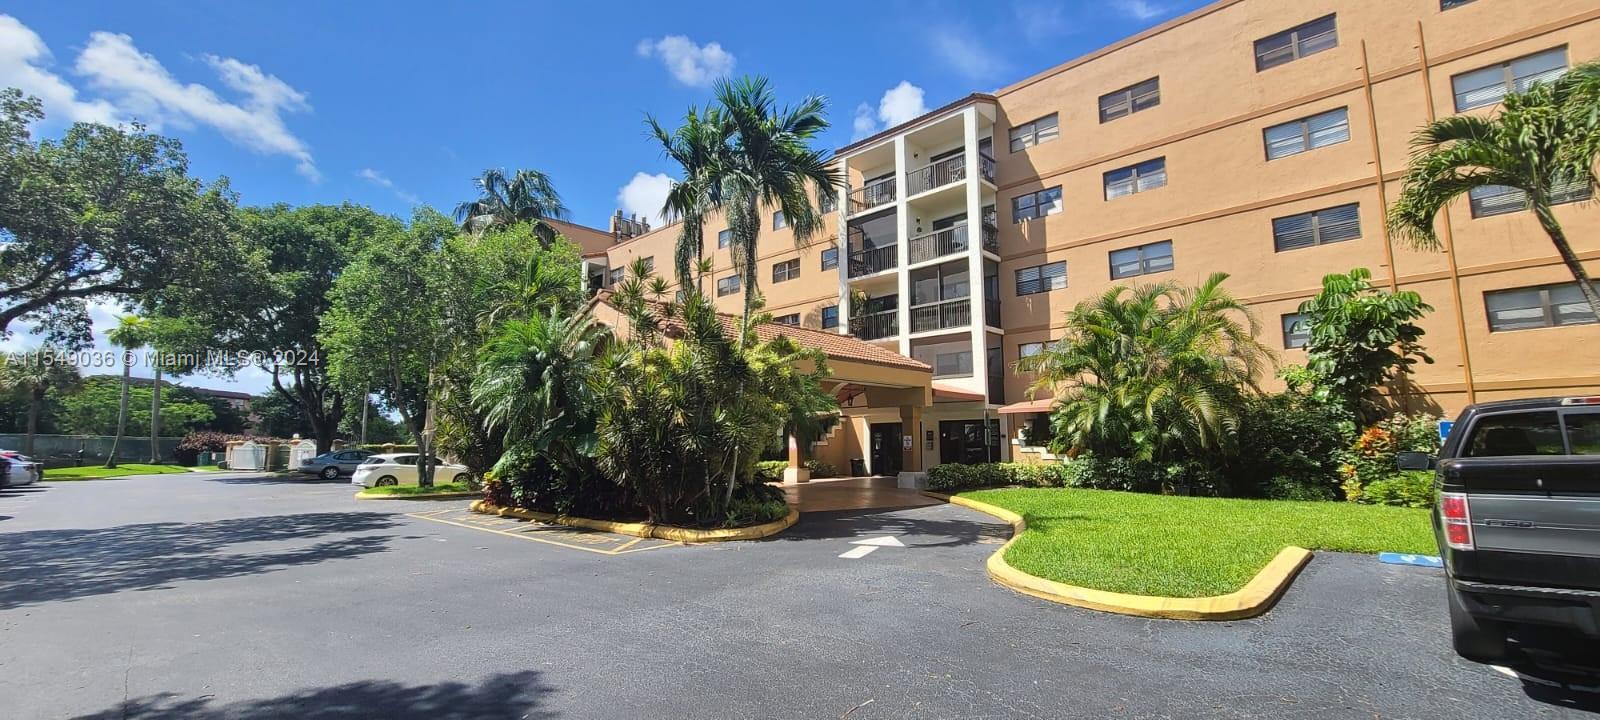 Photo of 701 NW 19th St #509 in Fort Lauderdale, FL